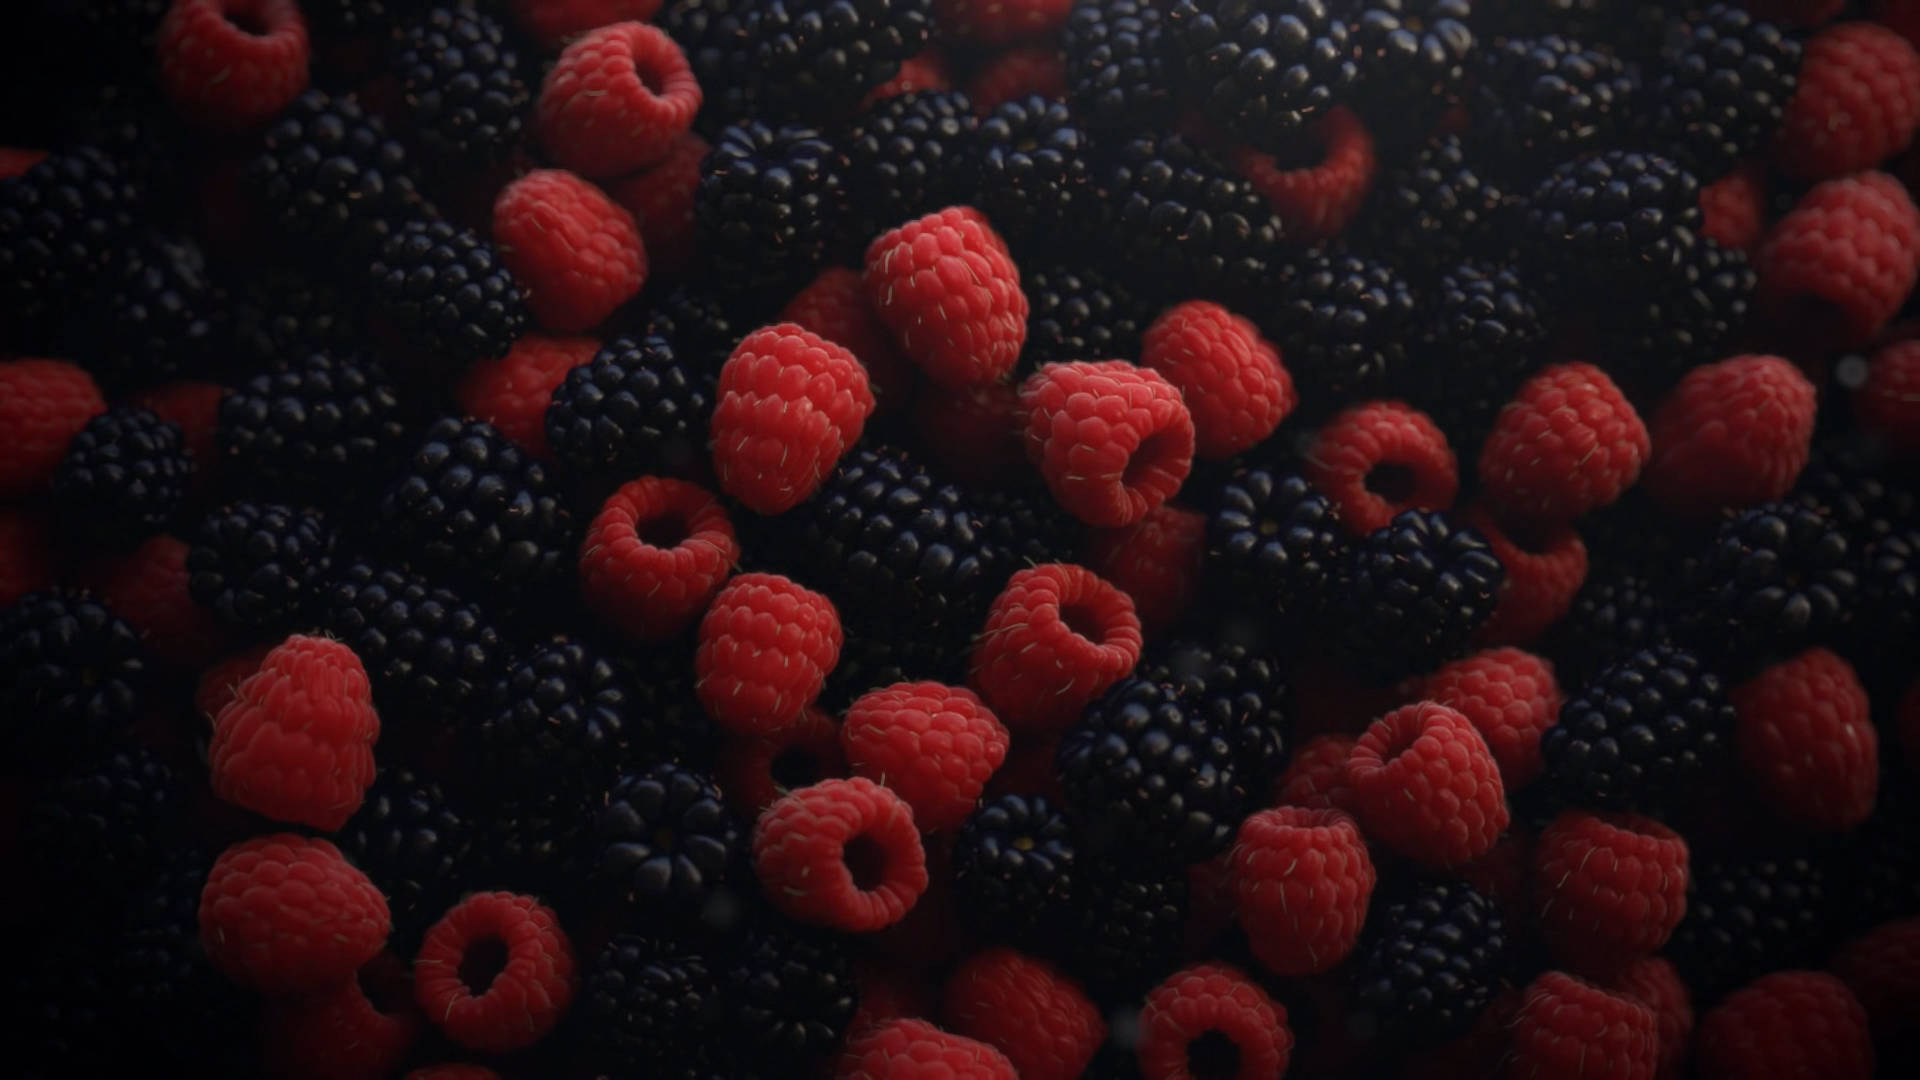 The Red And Black Raspberries Wallpaper